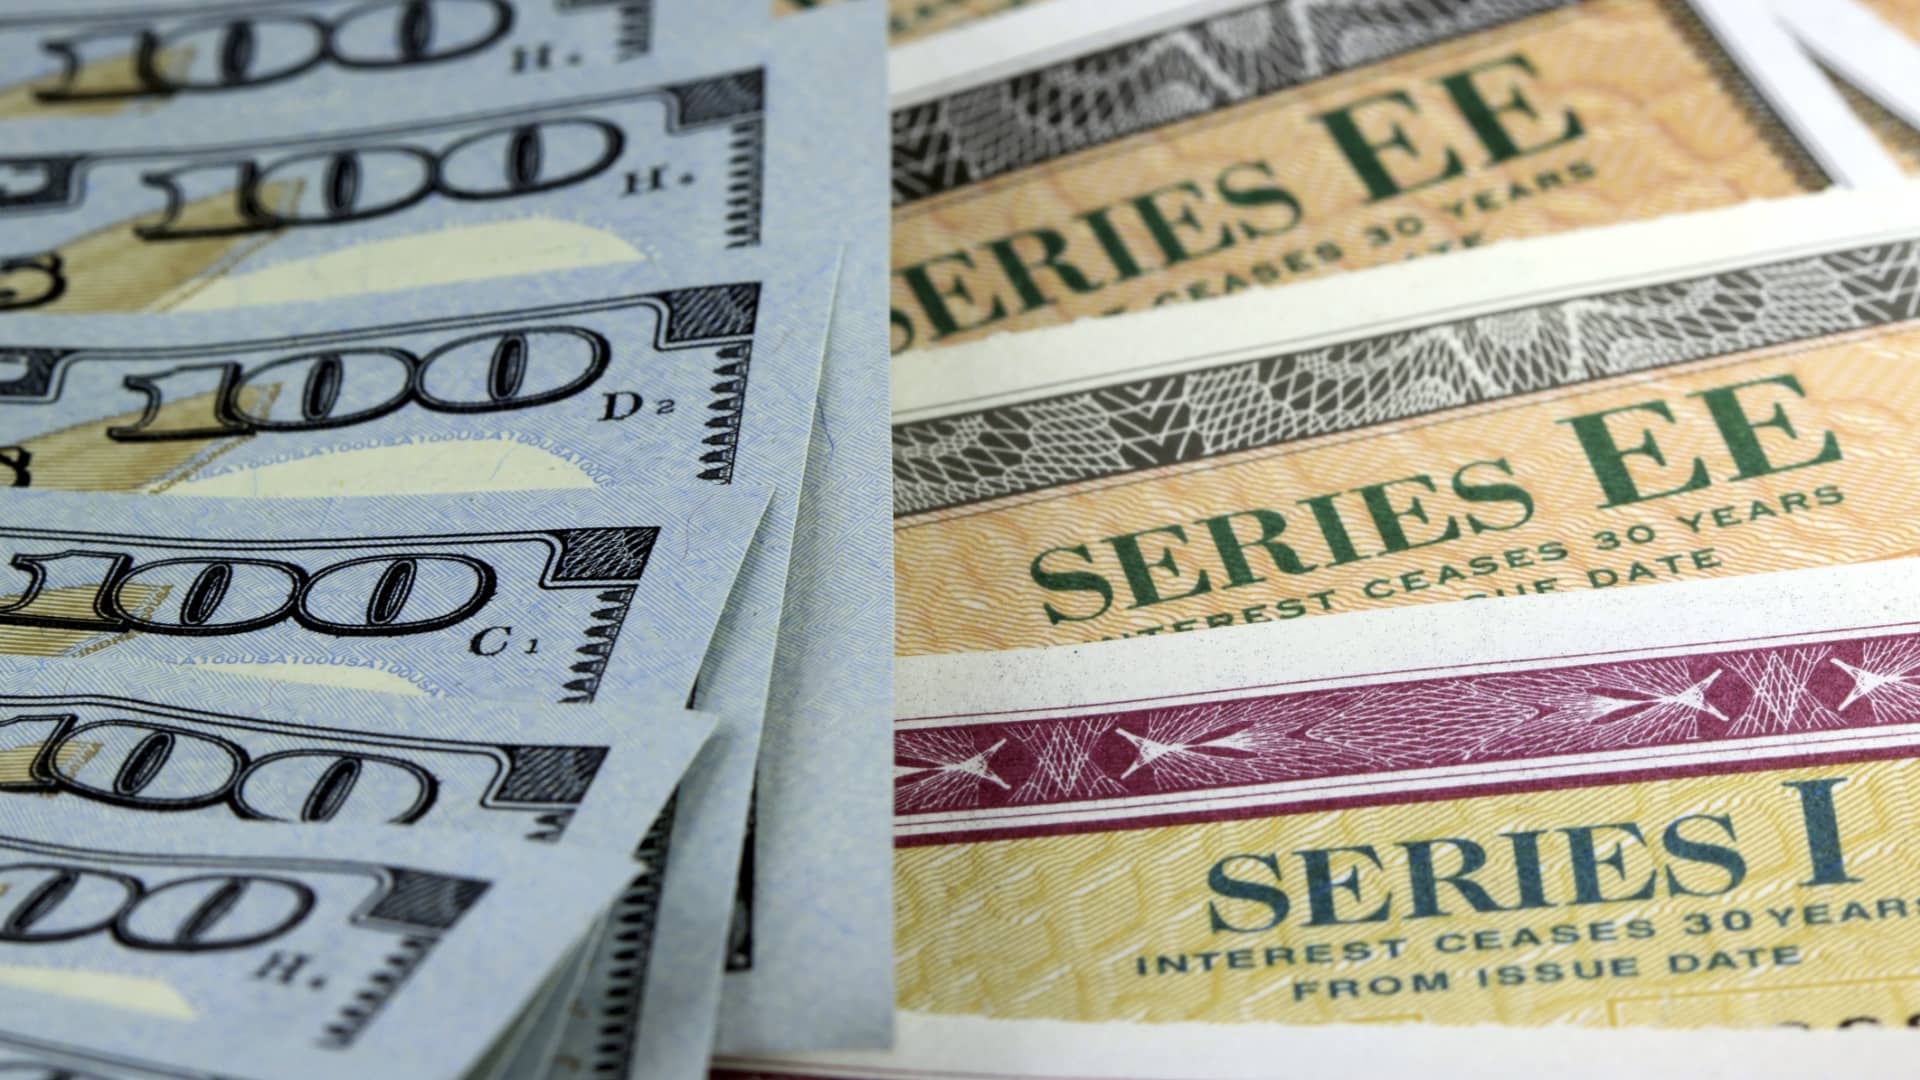 Series I bonds rate could top 5% in November. Here's what to know